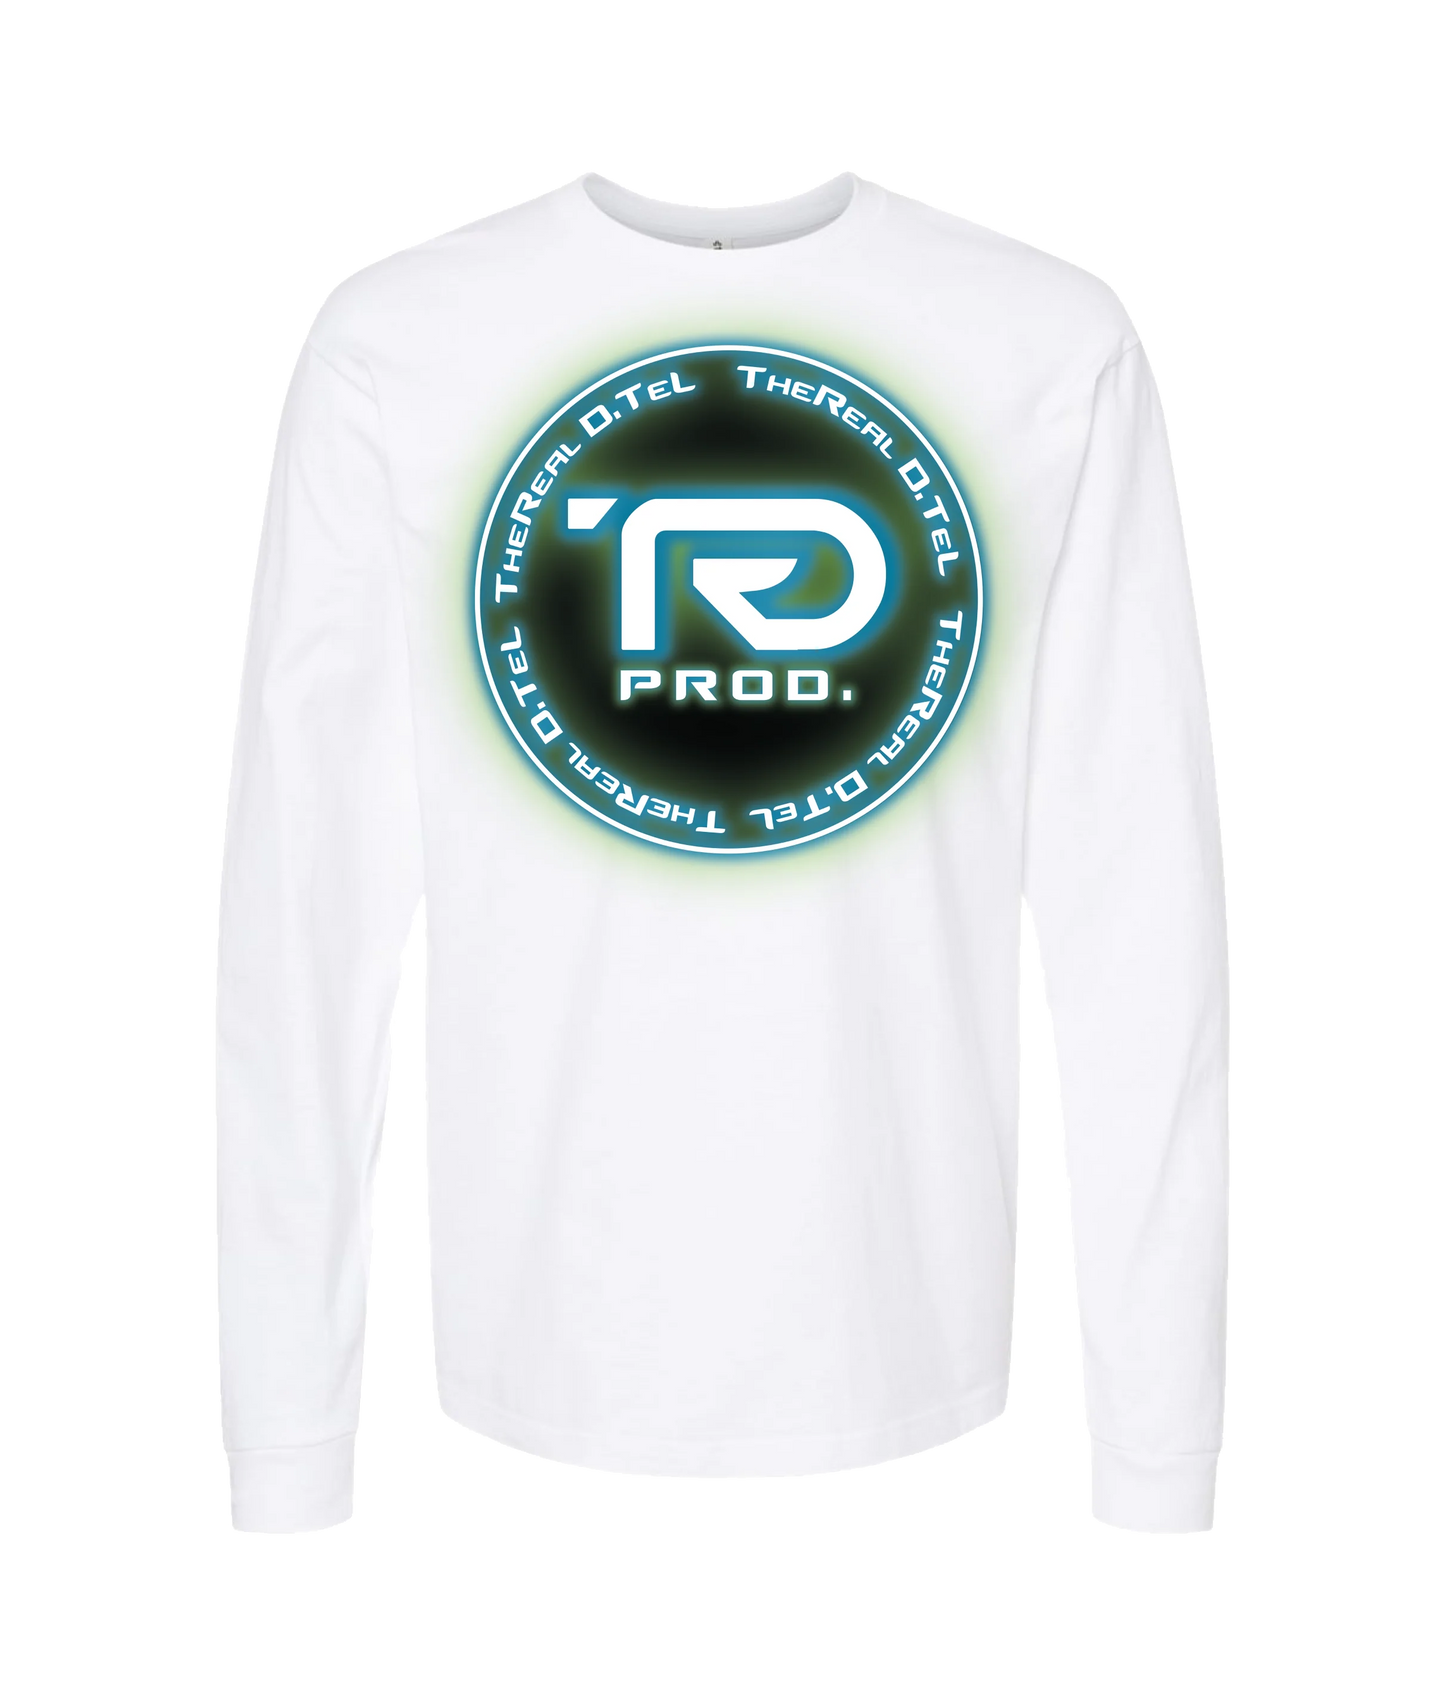 TheReal D.TeL - Logo - White Long Sleeve T